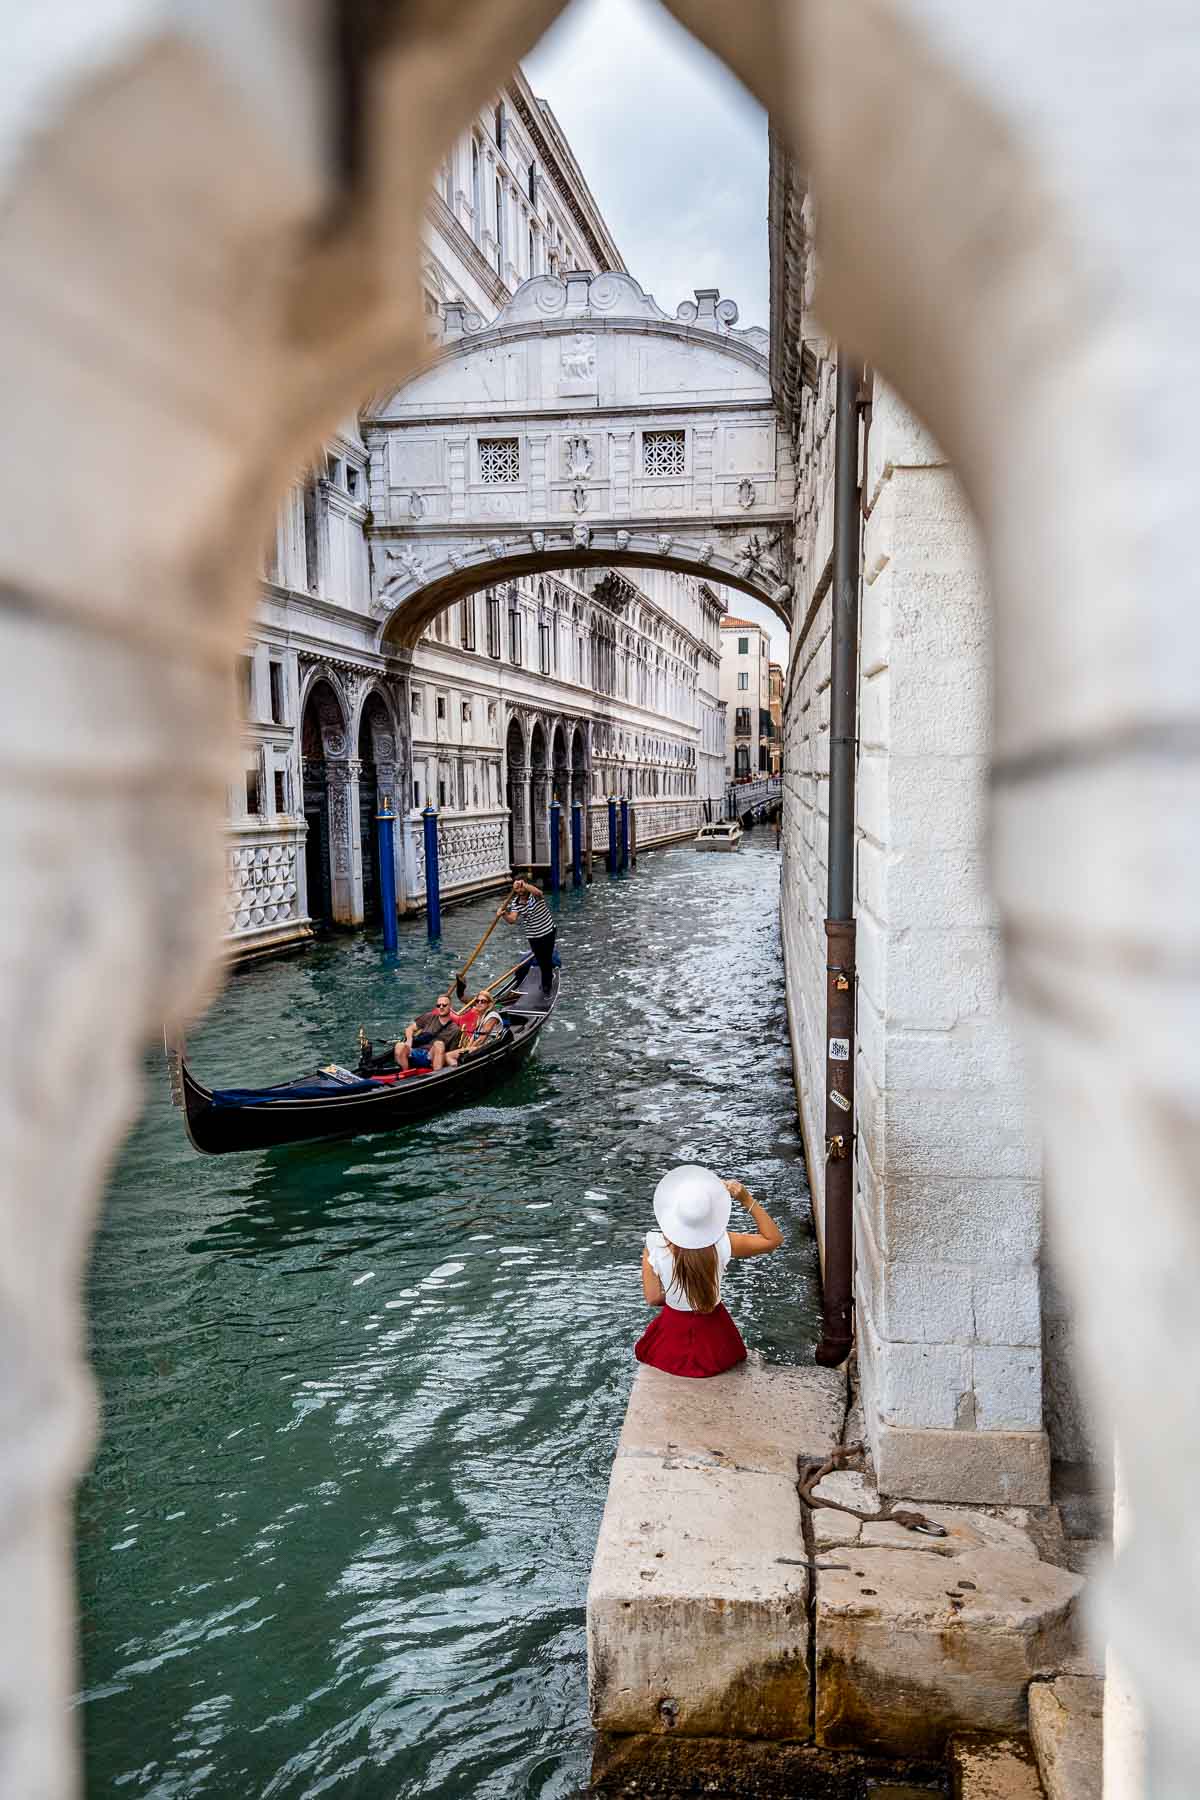 Girl in a red skirt sitting below the Bridge of Sighs in Venice, Italy